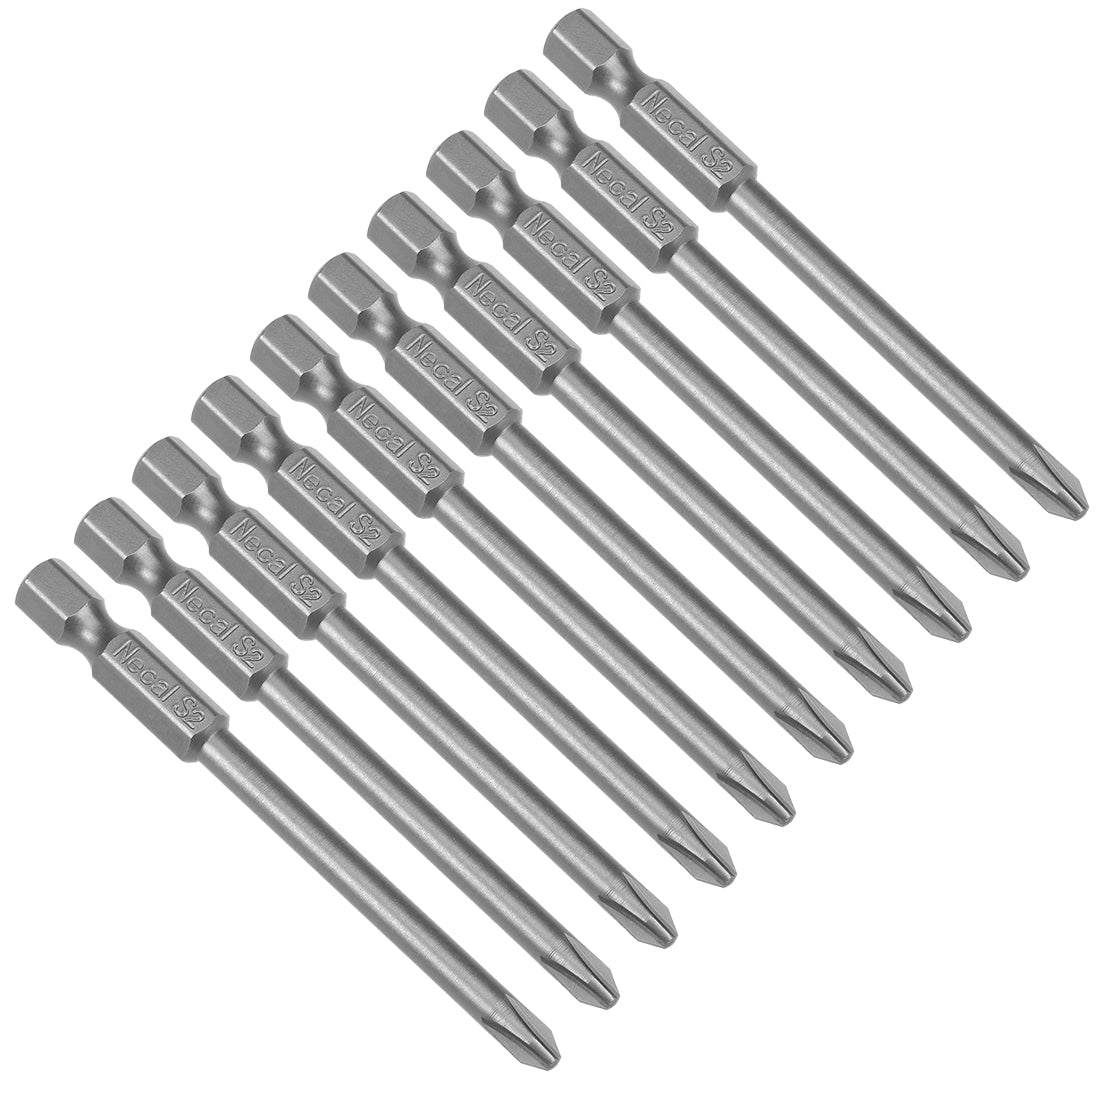 Uxcell Uxcell 10pcs 75mm 1/4" Hex Shank Magnetic 4.5mm PH1 Phillips Head Screwdriver Bits S2